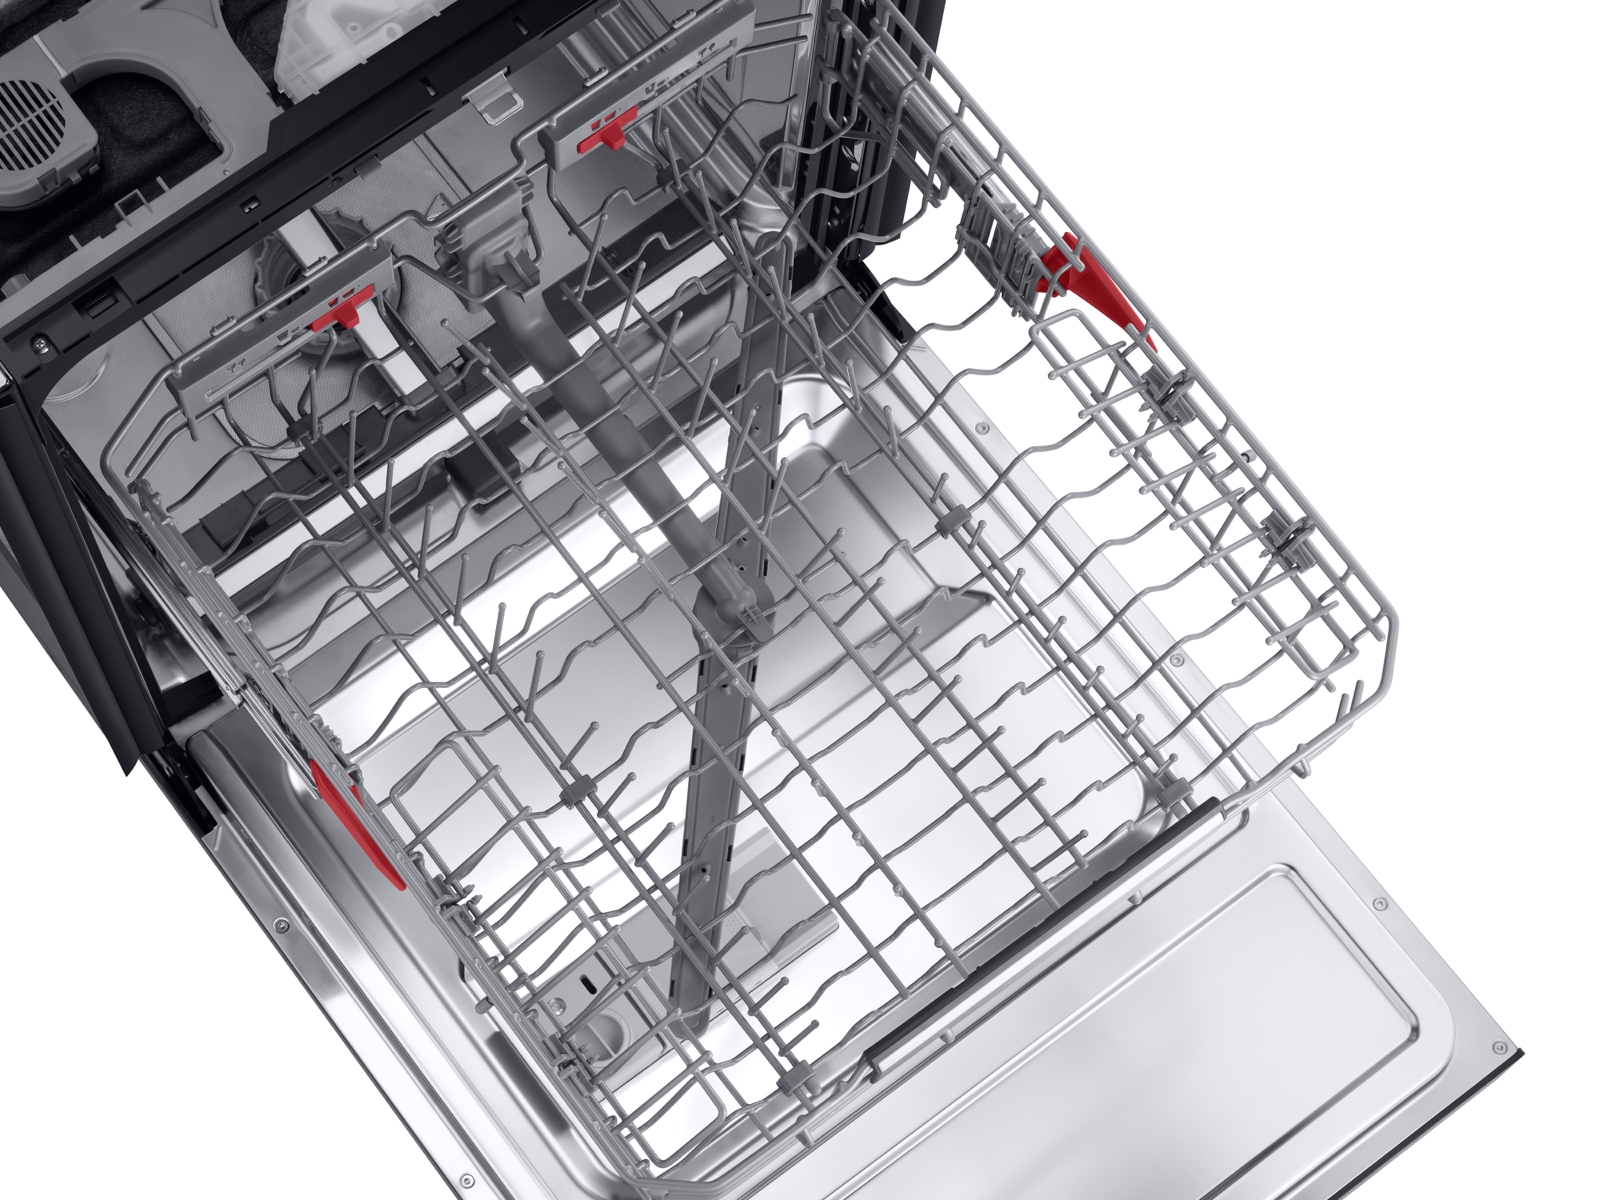 Thumbnail image of AutoRelease Smart 39dBA Dishwasher with Linear Wash in Black Stainless Steel